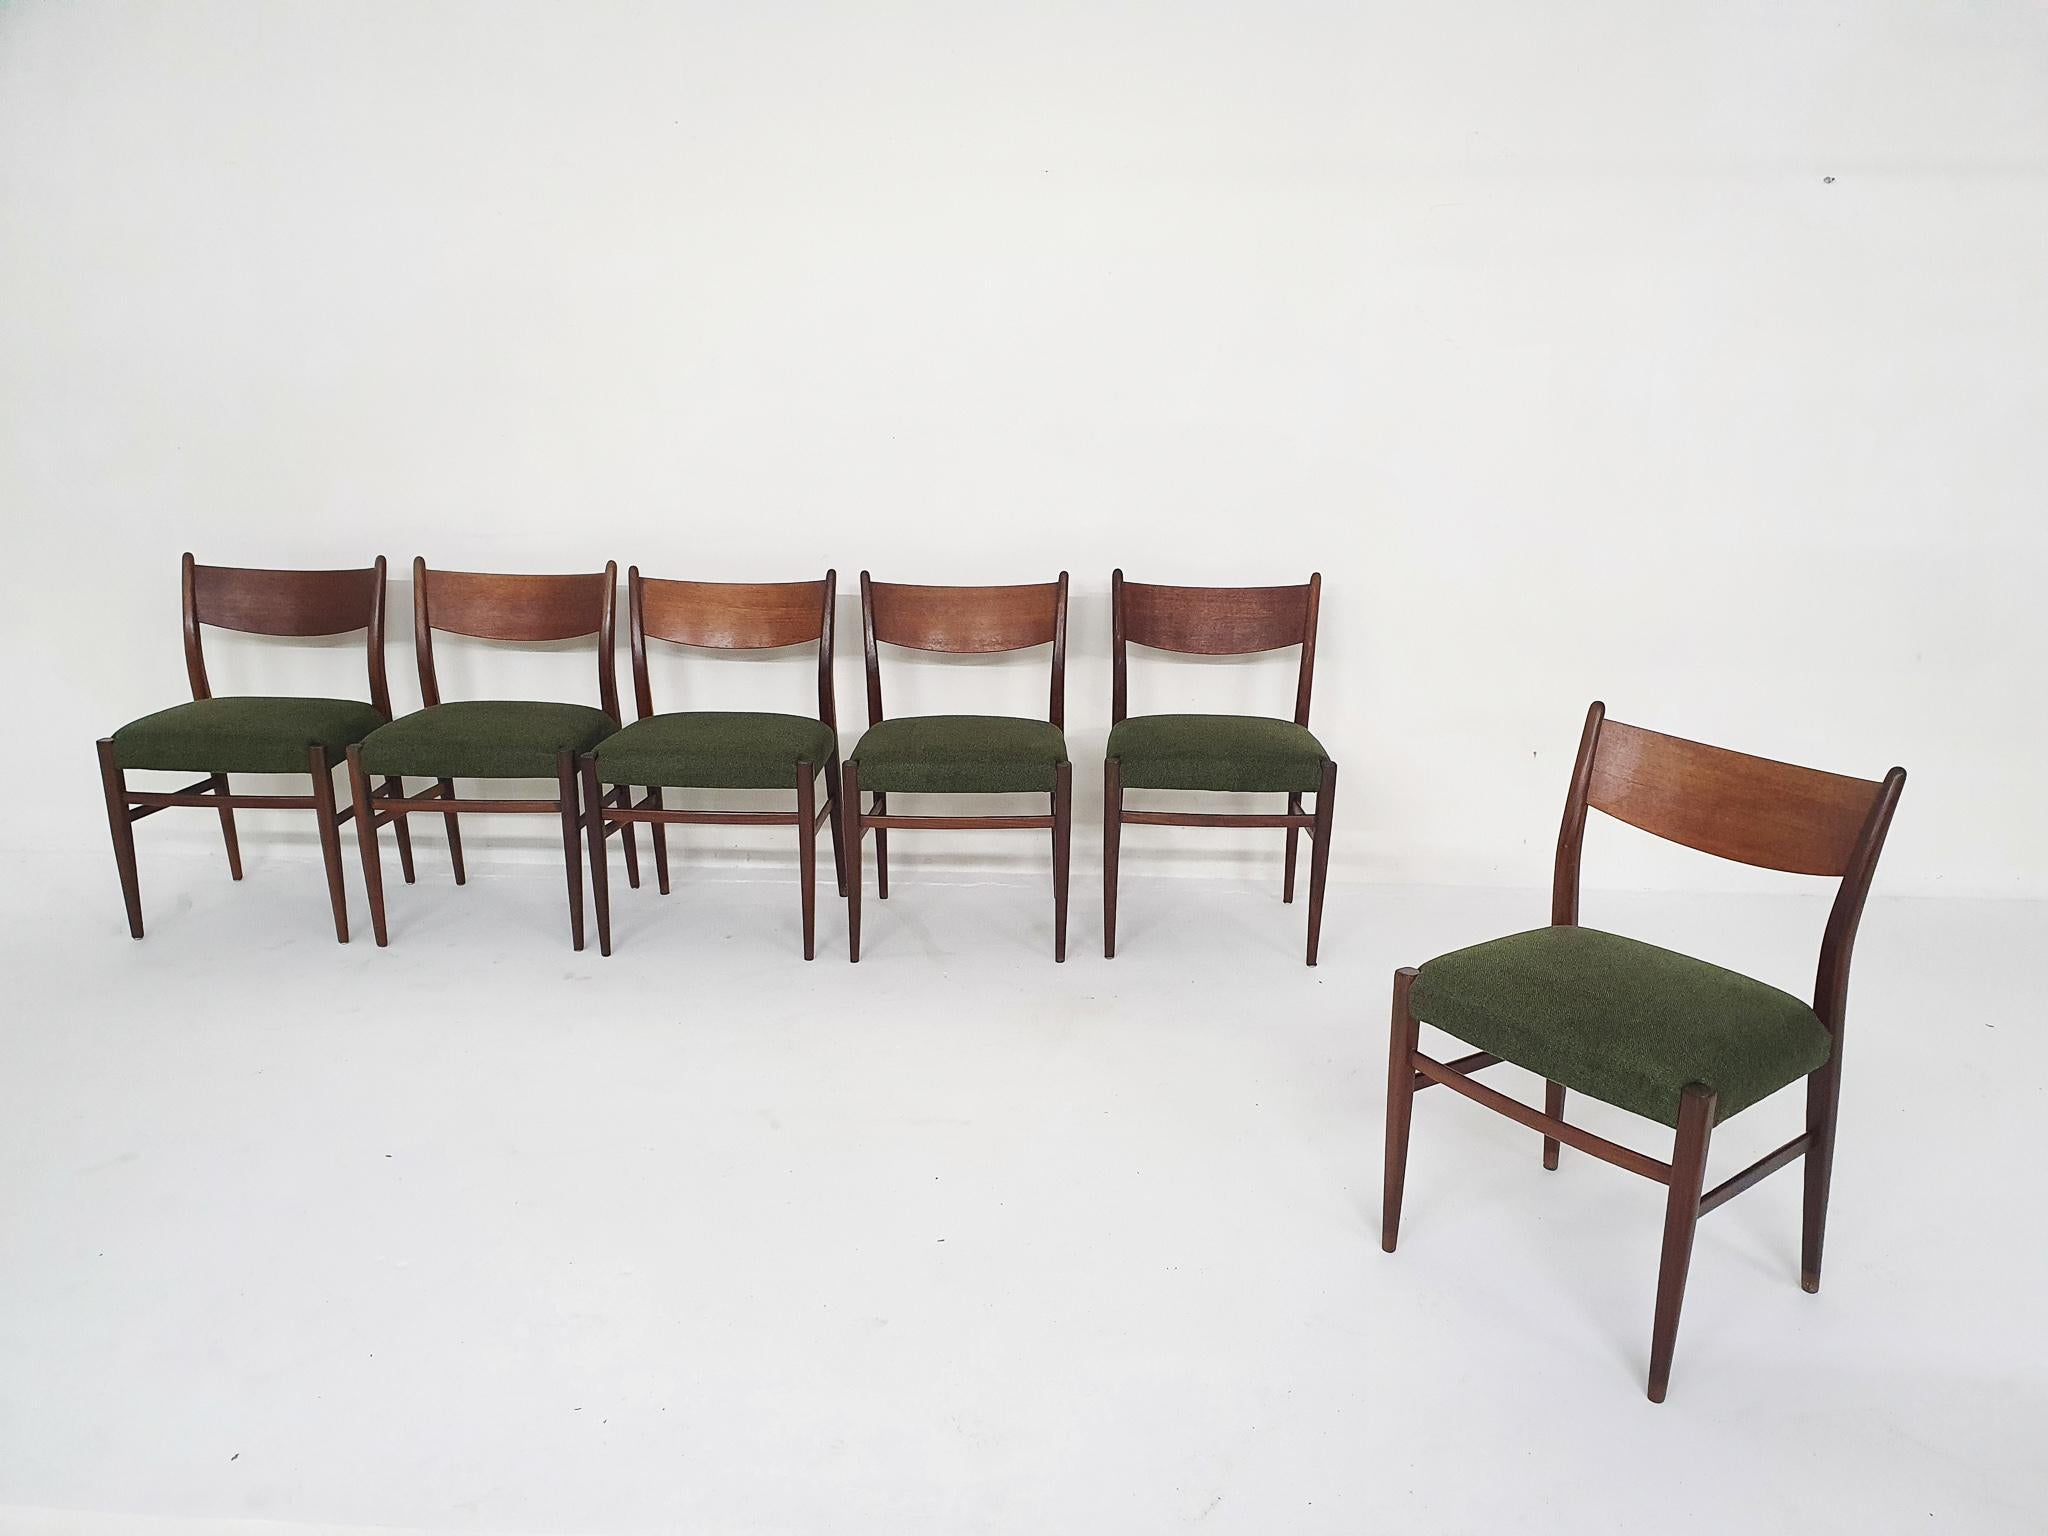 Teak dining chairs with new forrest green upholstery.